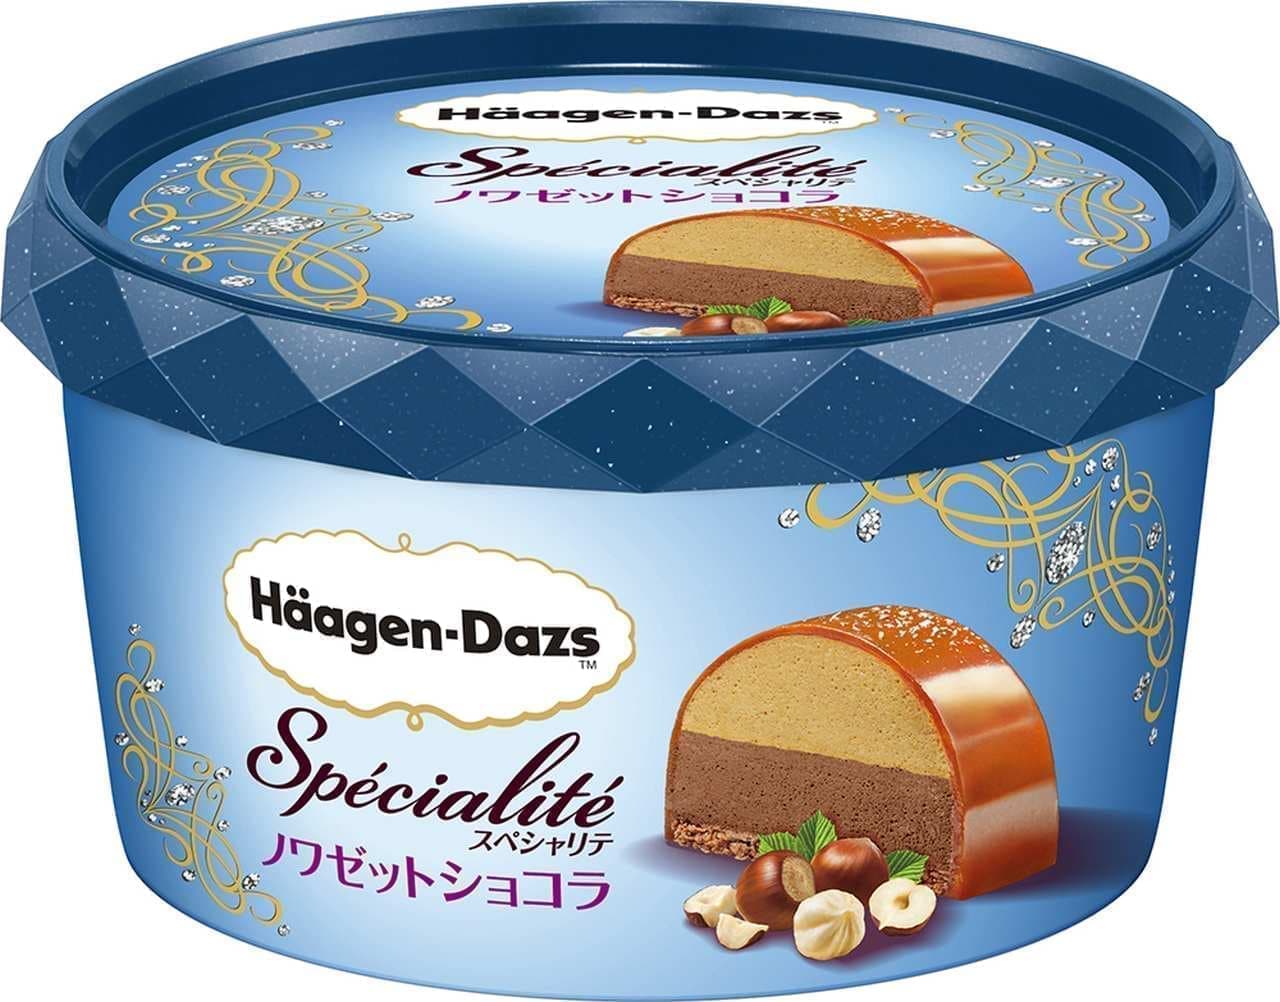 Haagen-Dazs Specialty "Noiset Chocolat" for a limited time